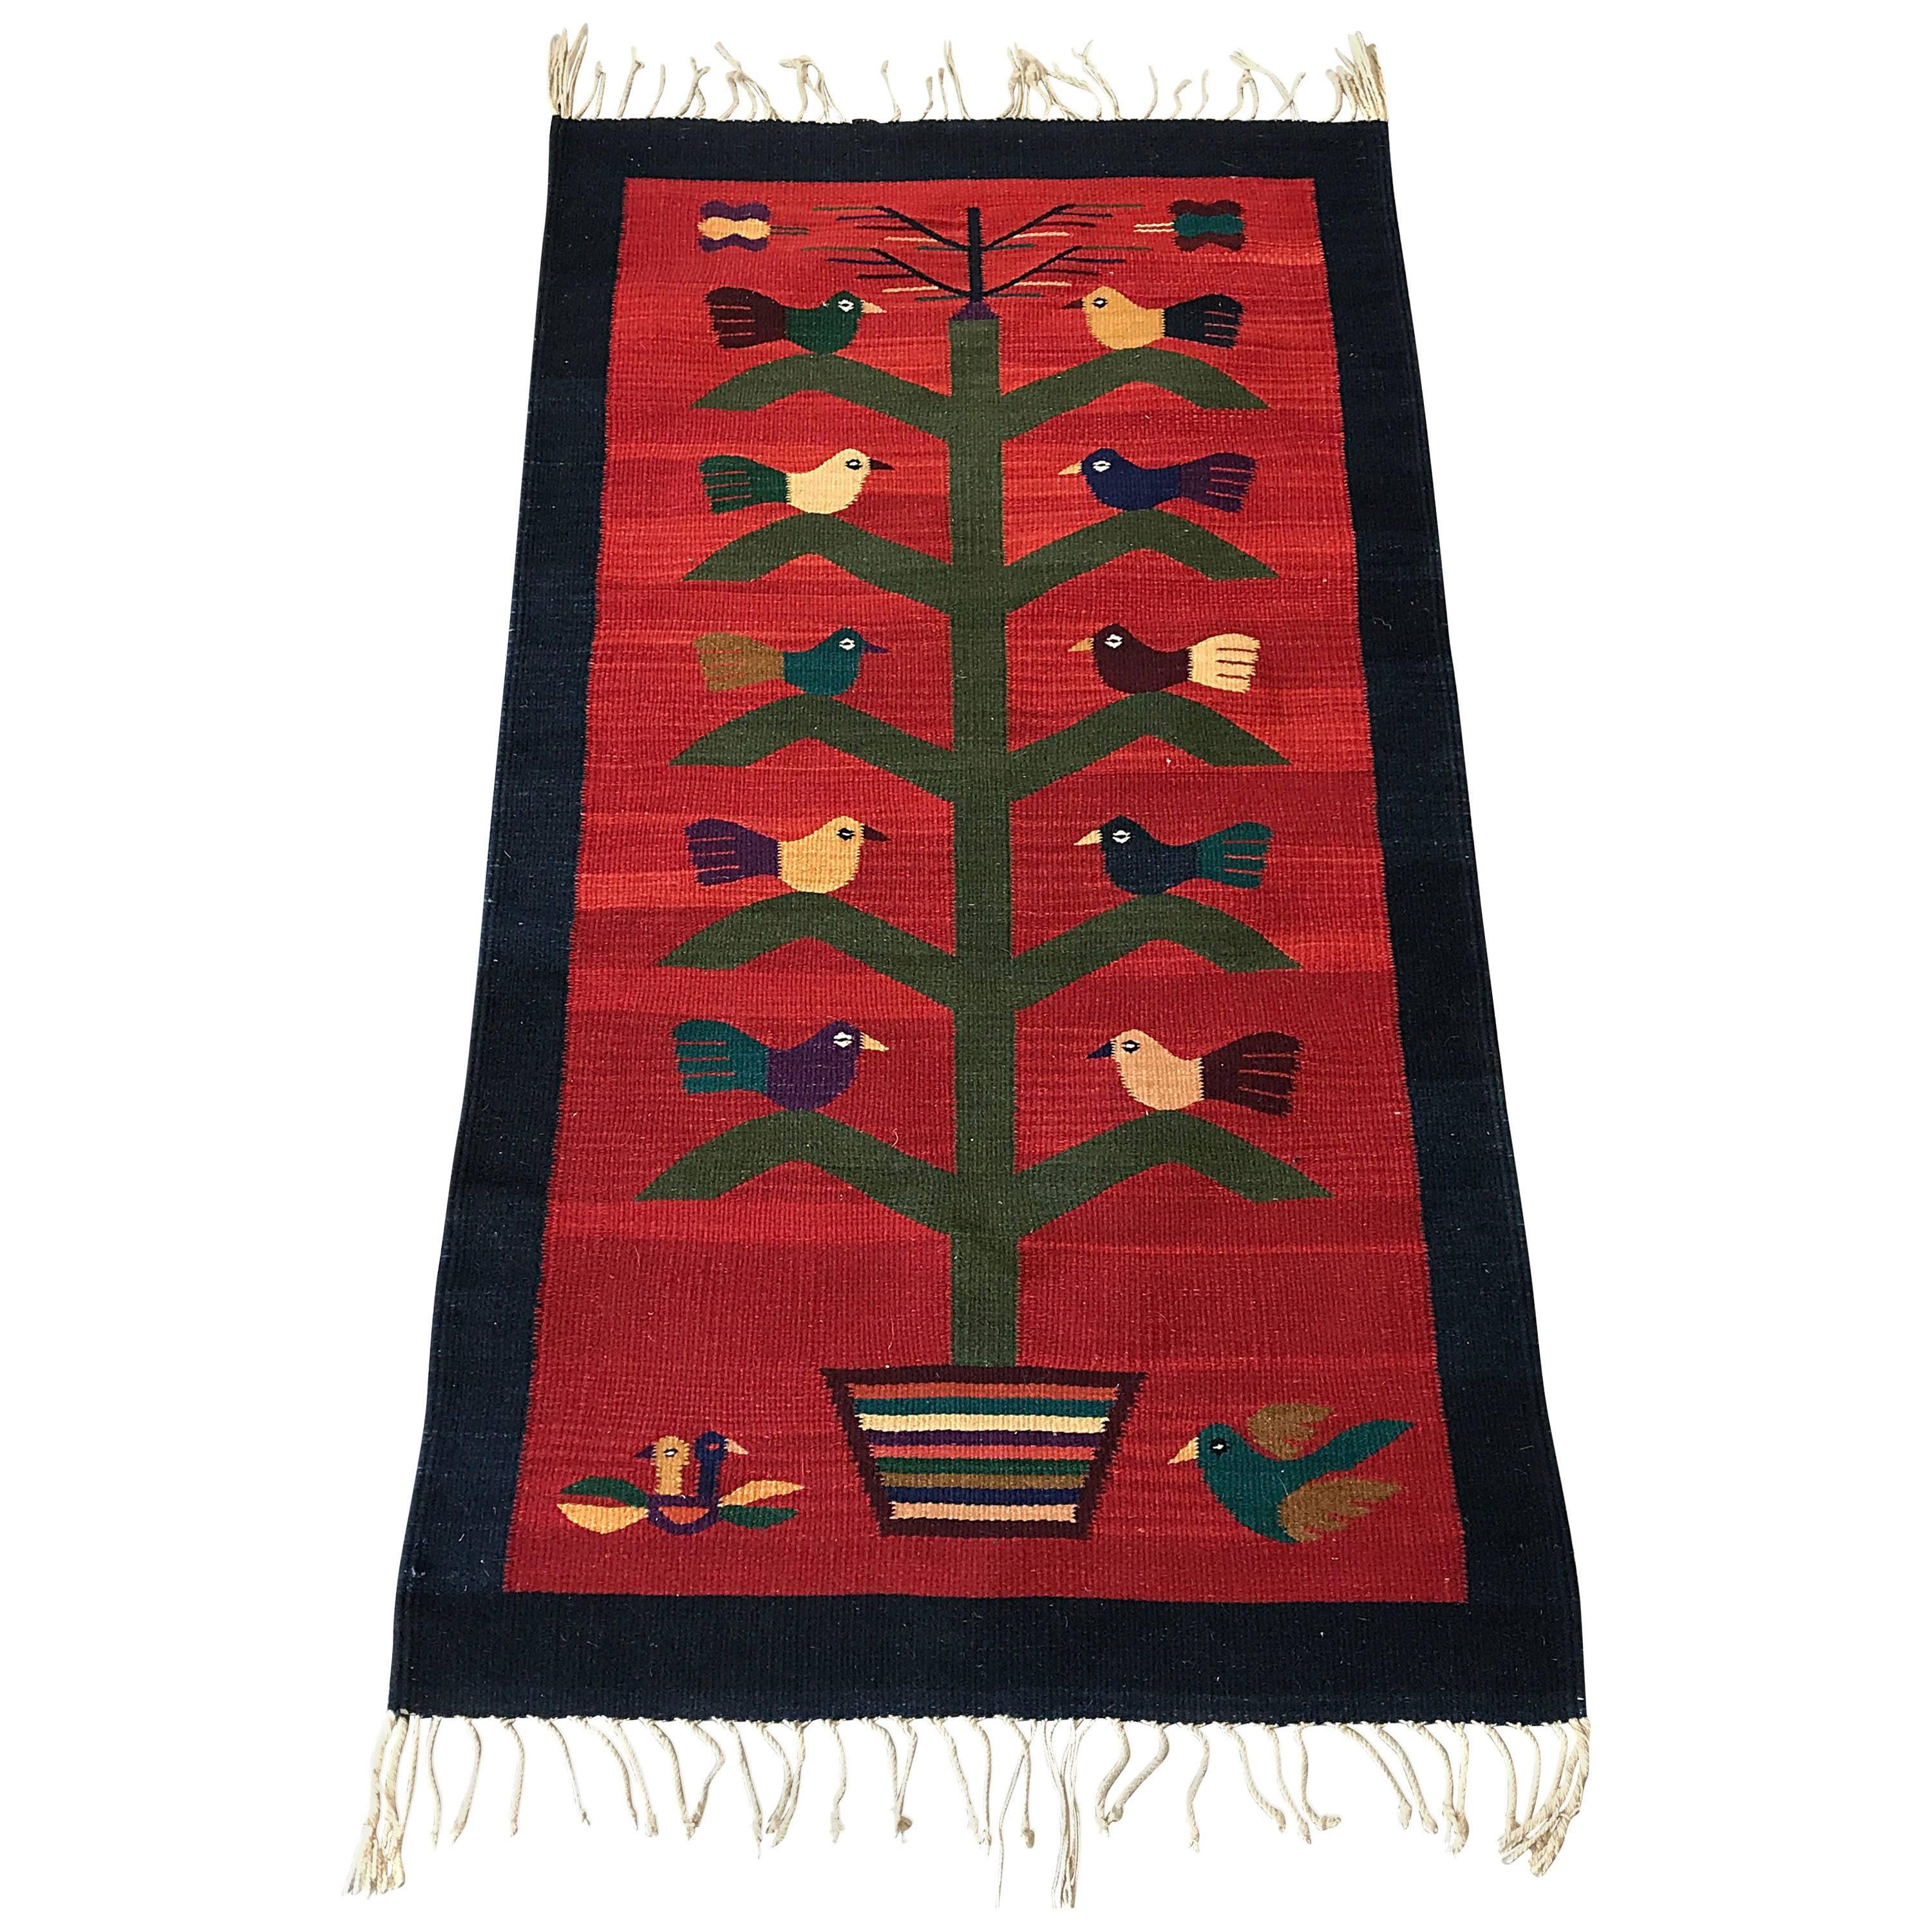 1950s Red Kilim Rug with a Bird and Potted Tree Motif